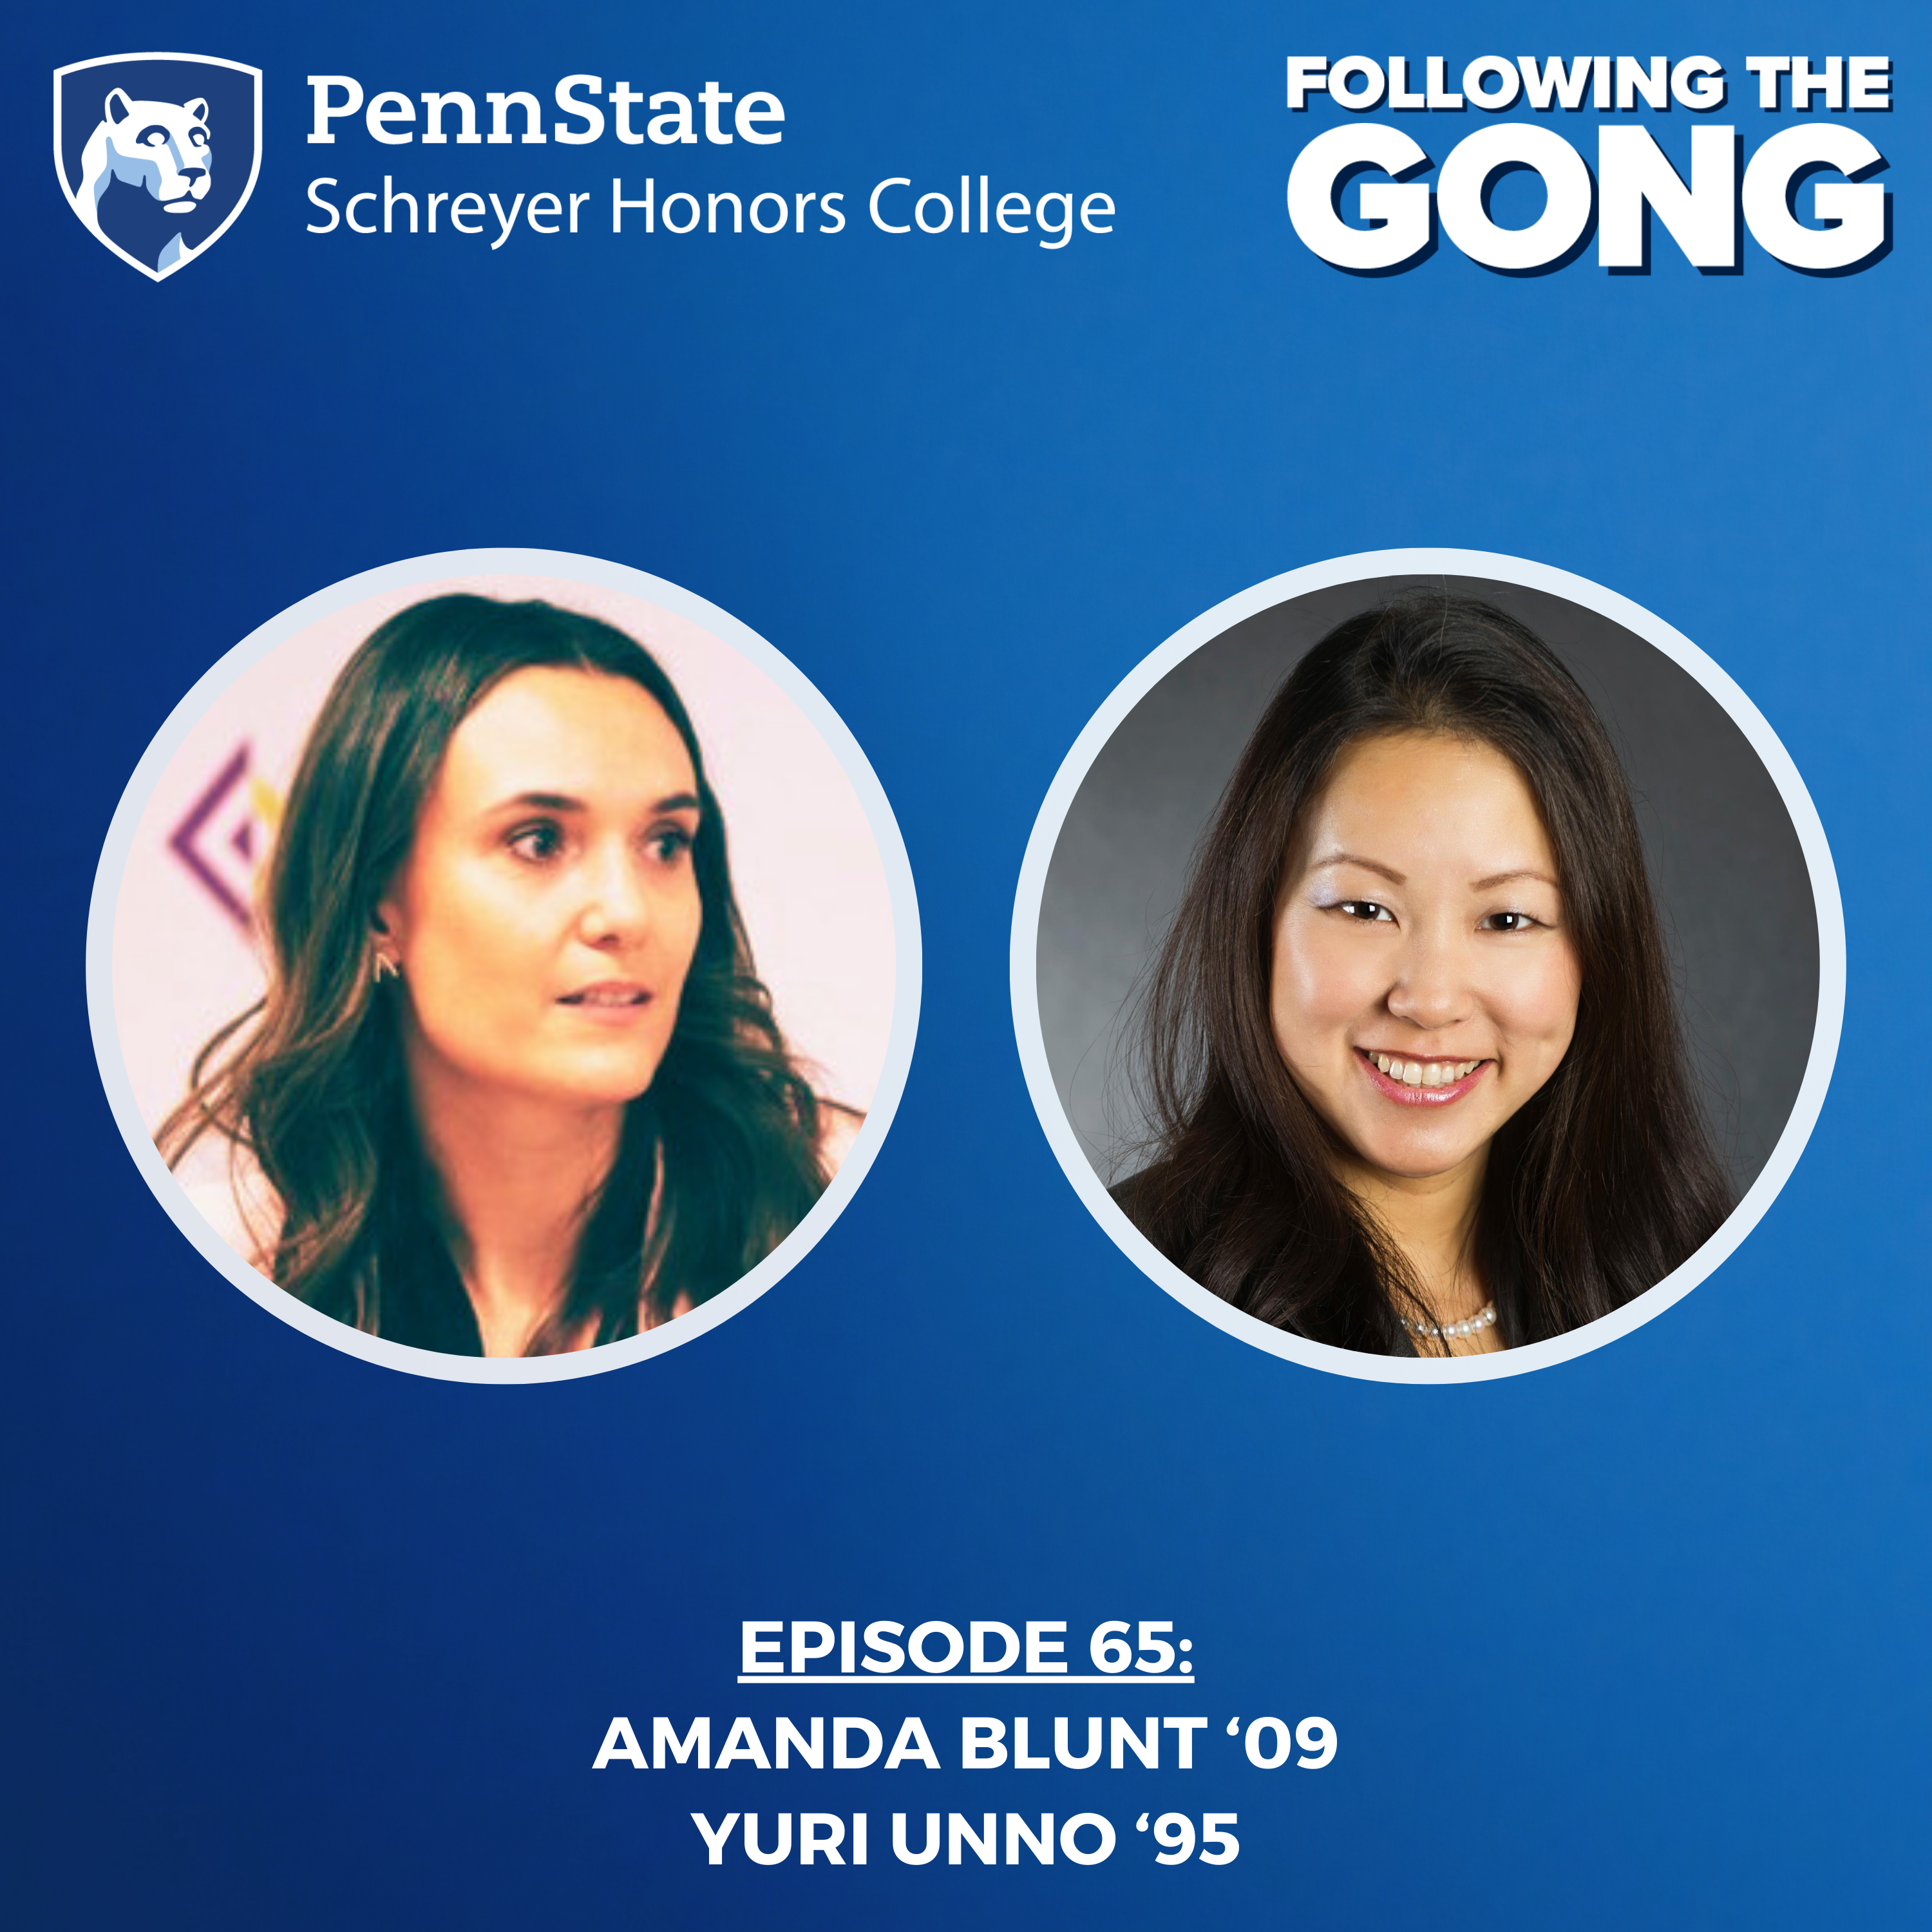 FTG 0065 – Driving Up The Hill with Automotive Trade Leaders Yuri Unno ’95 and Amanda Blunt ’09